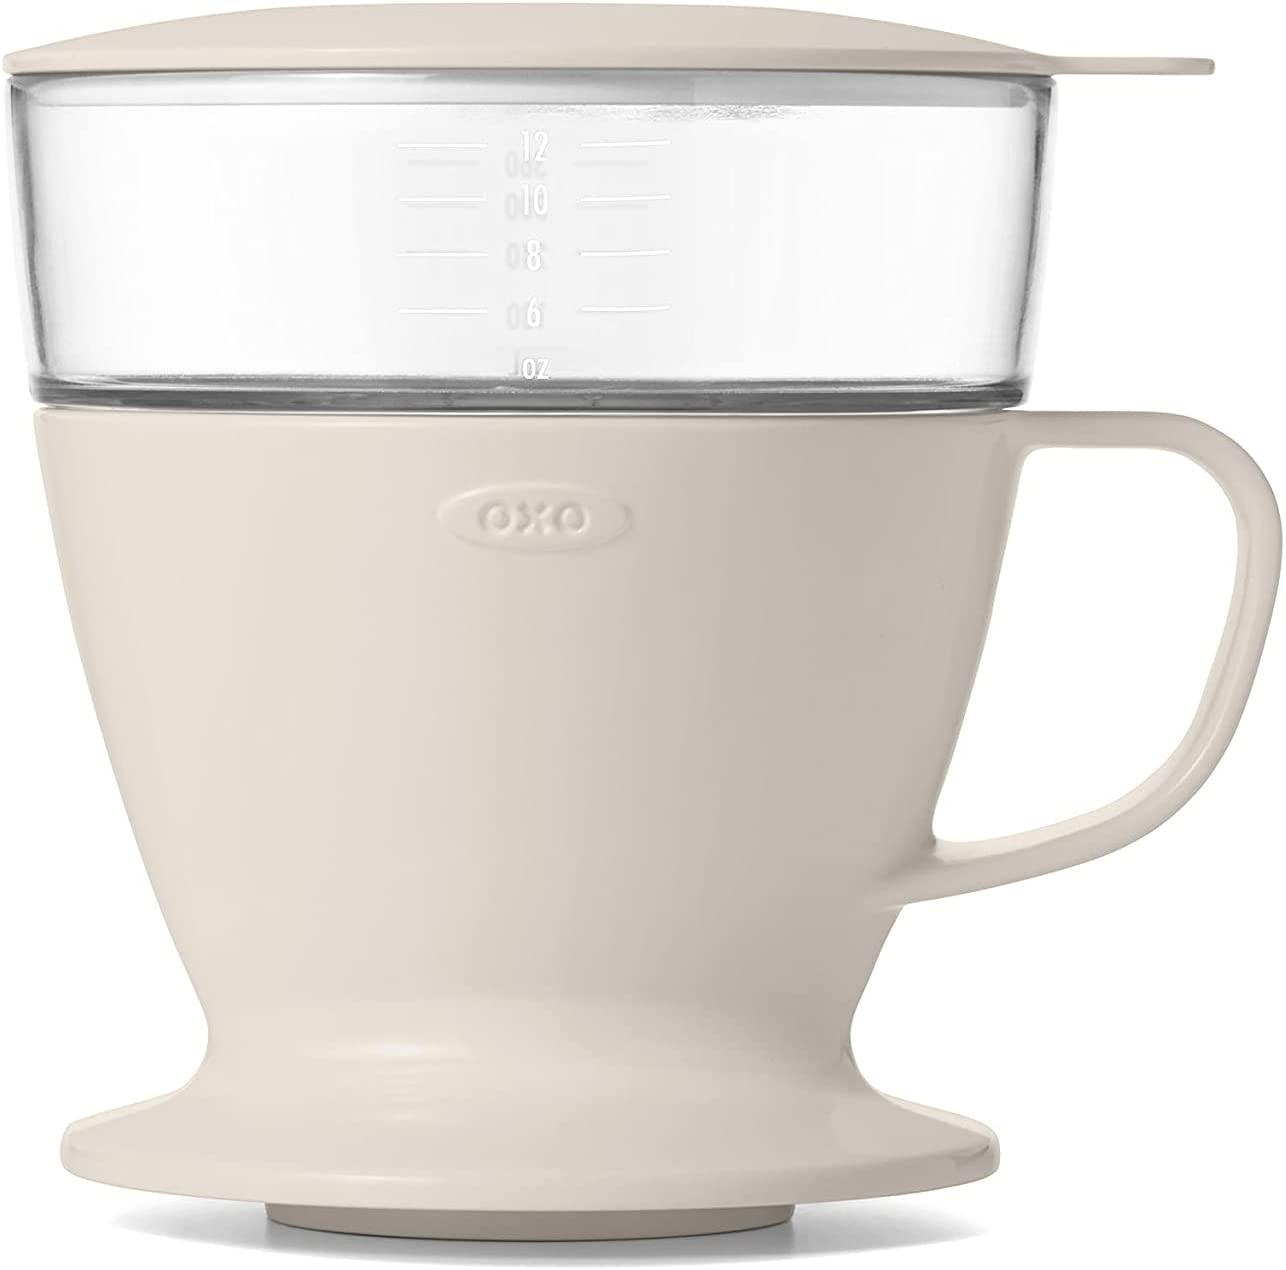 OXO Brew Pour-Over Coffee Maker for $12.97